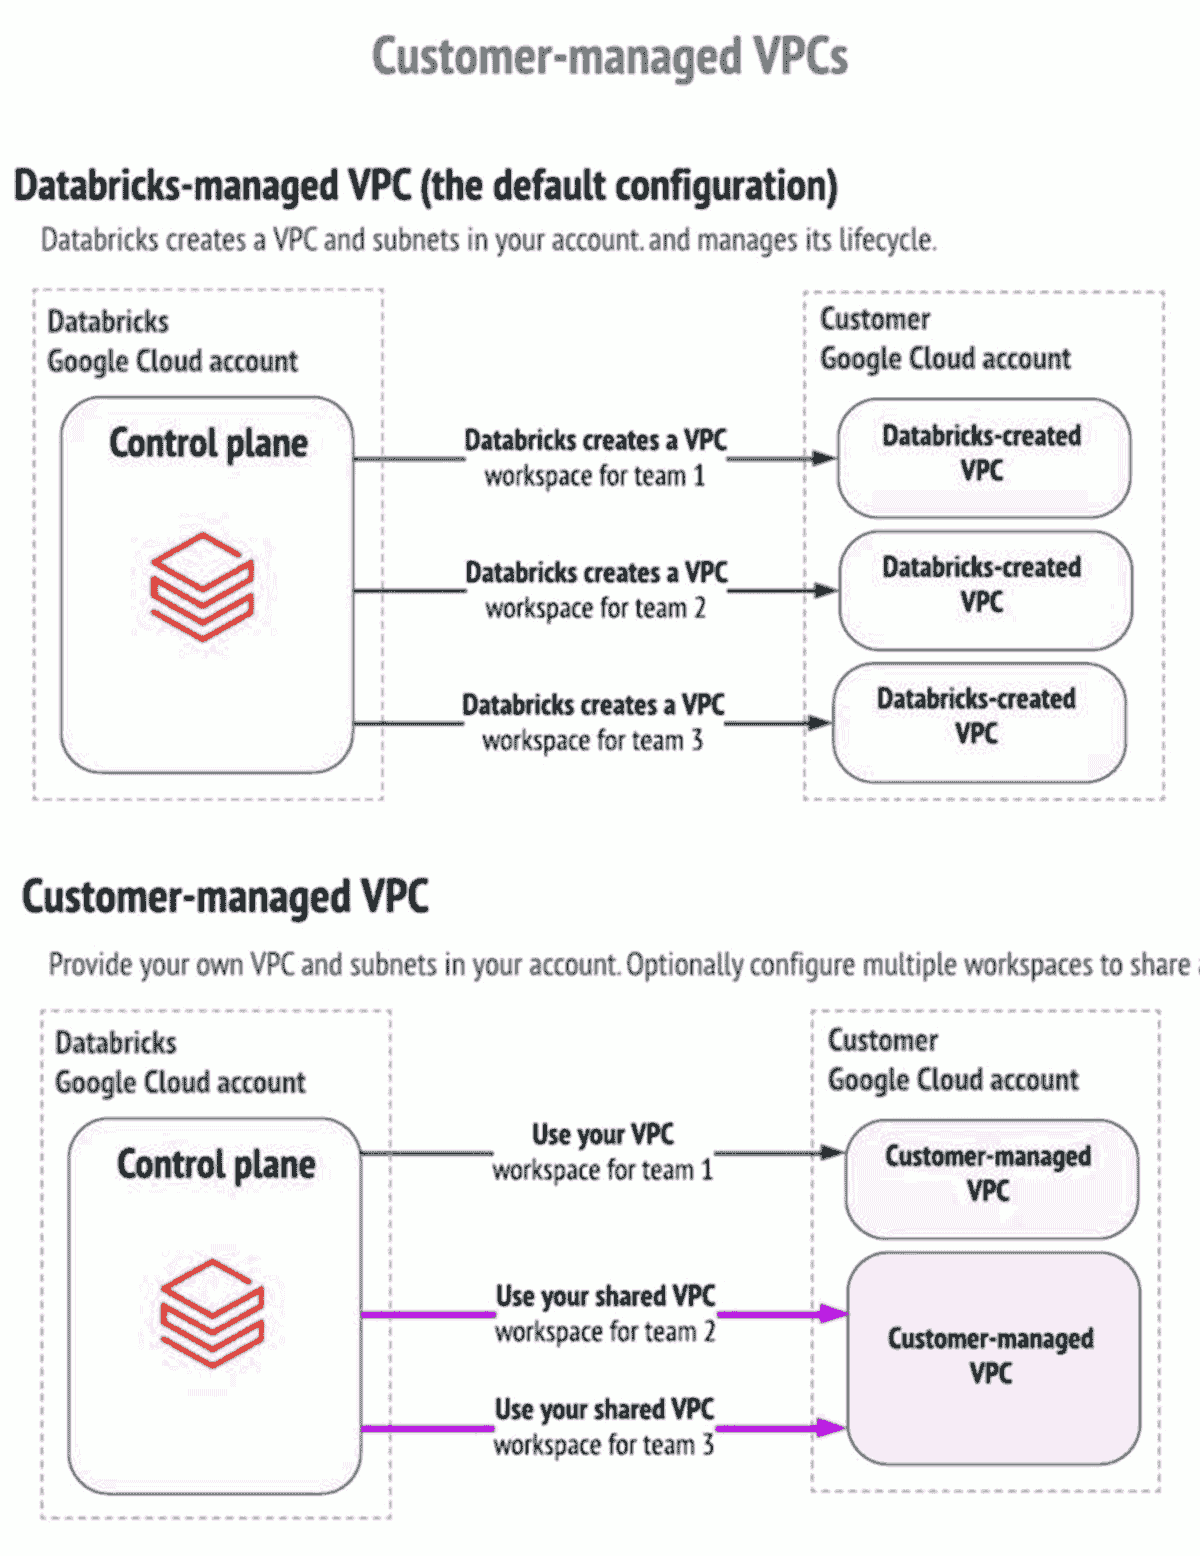 Differences between Databricks-managed and customer-managed VPCs